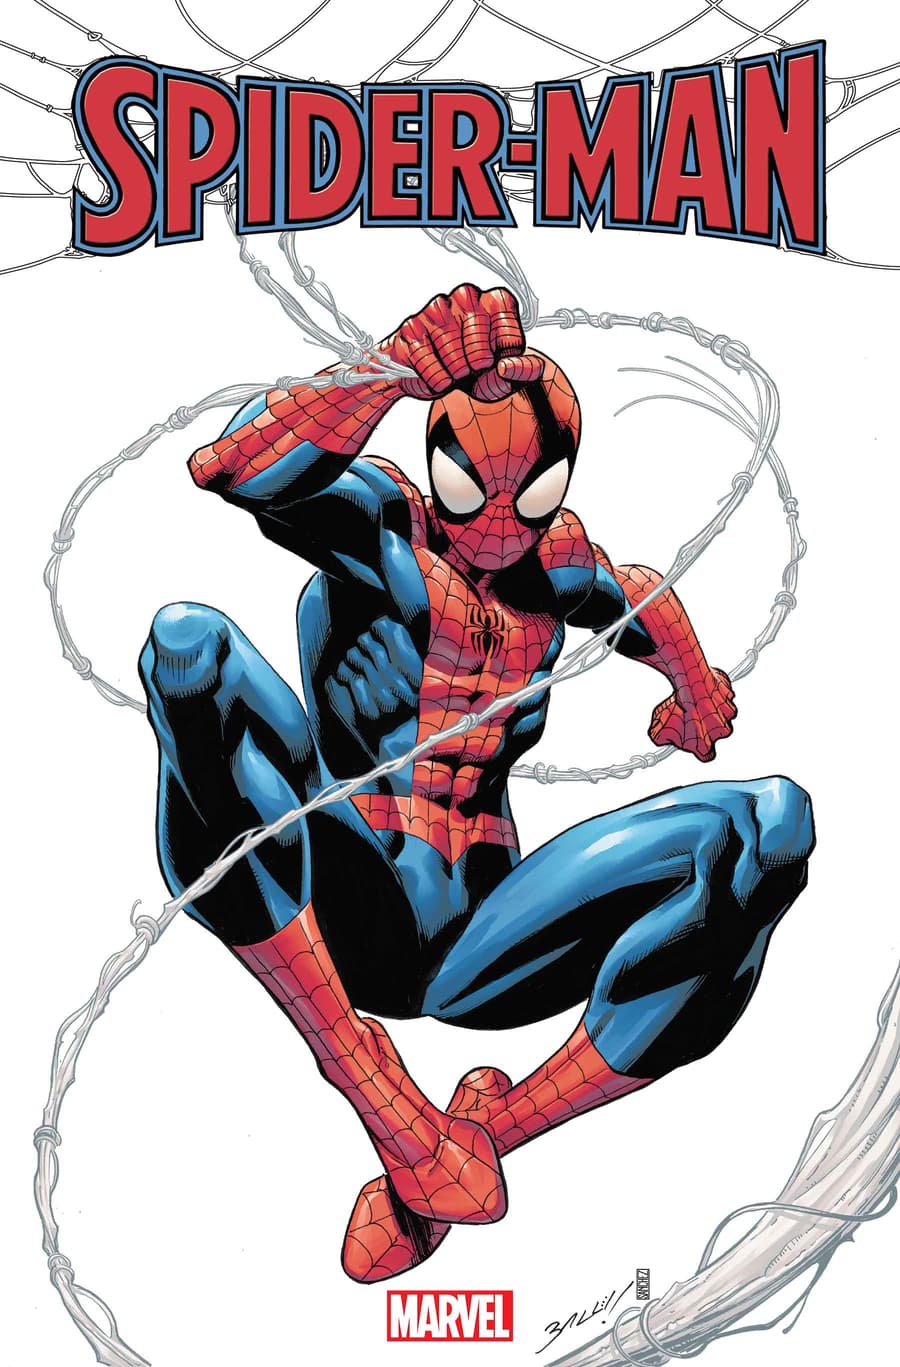 SPIDER-MAN (2022) #1 cover by Mark Bagley